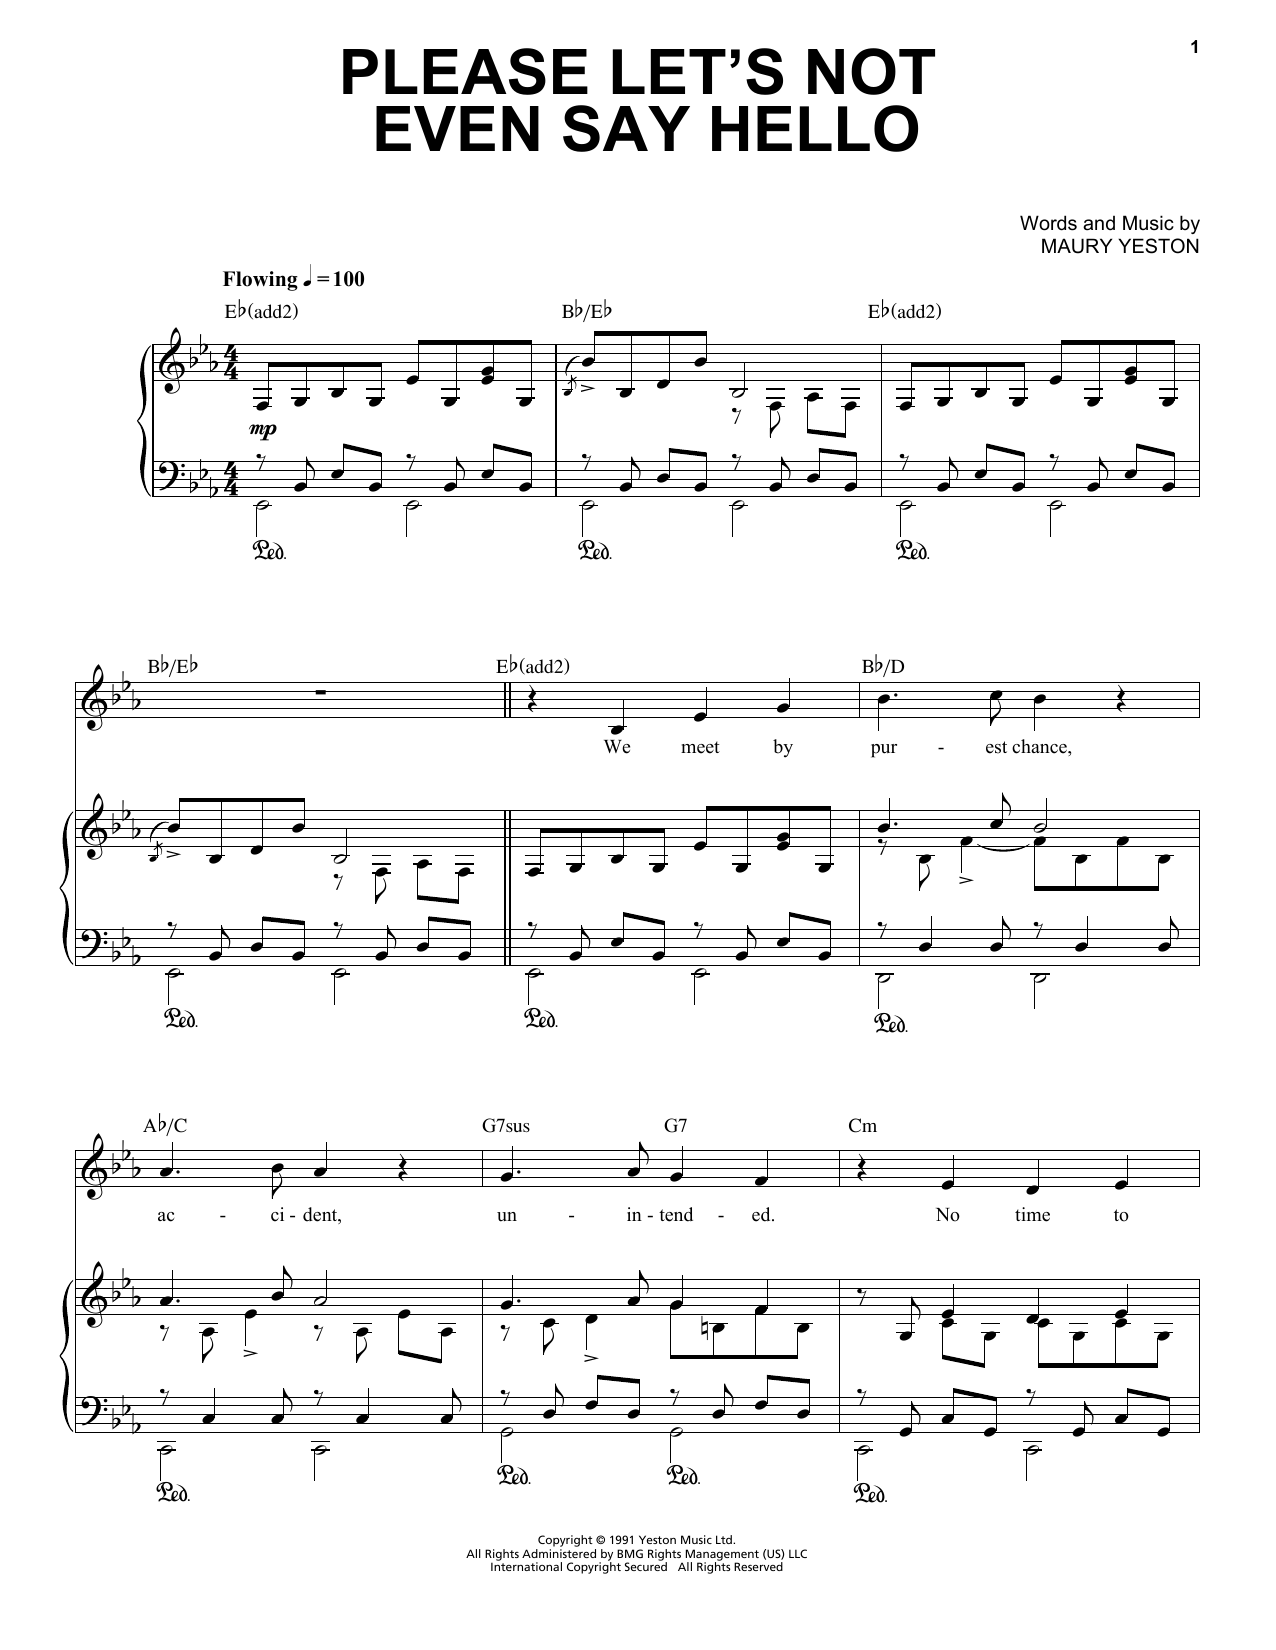 Download Maury Yeston Please Let's Not Even Say Hello Sheet Music